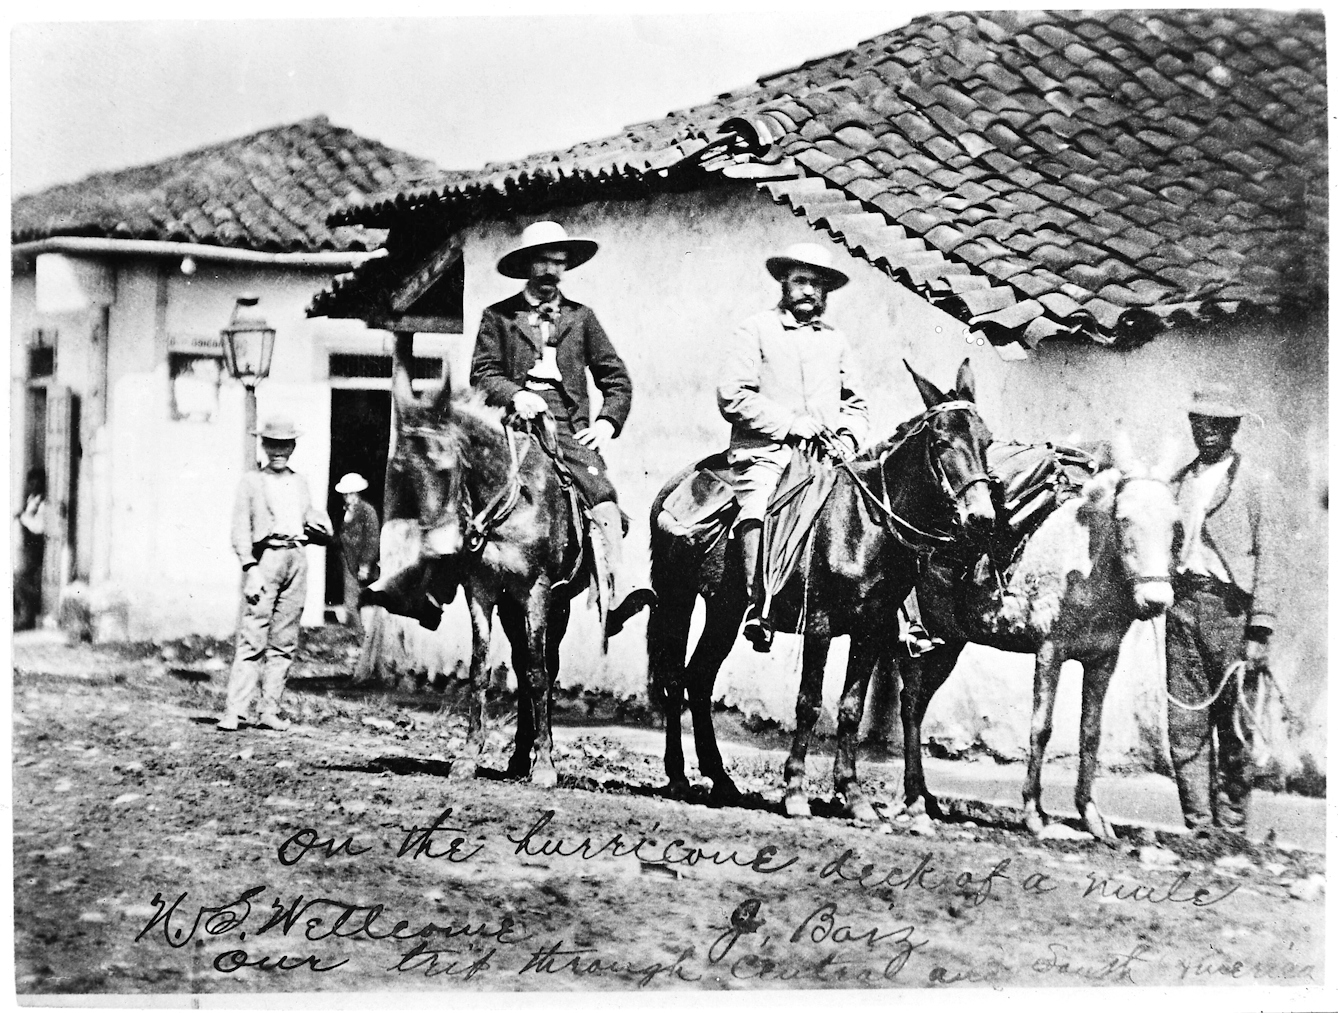 Black and white photograph of two European men on mules accompanied by a local man on foot standing in front of small buildings with tiled roofs in Ecuador in 1878